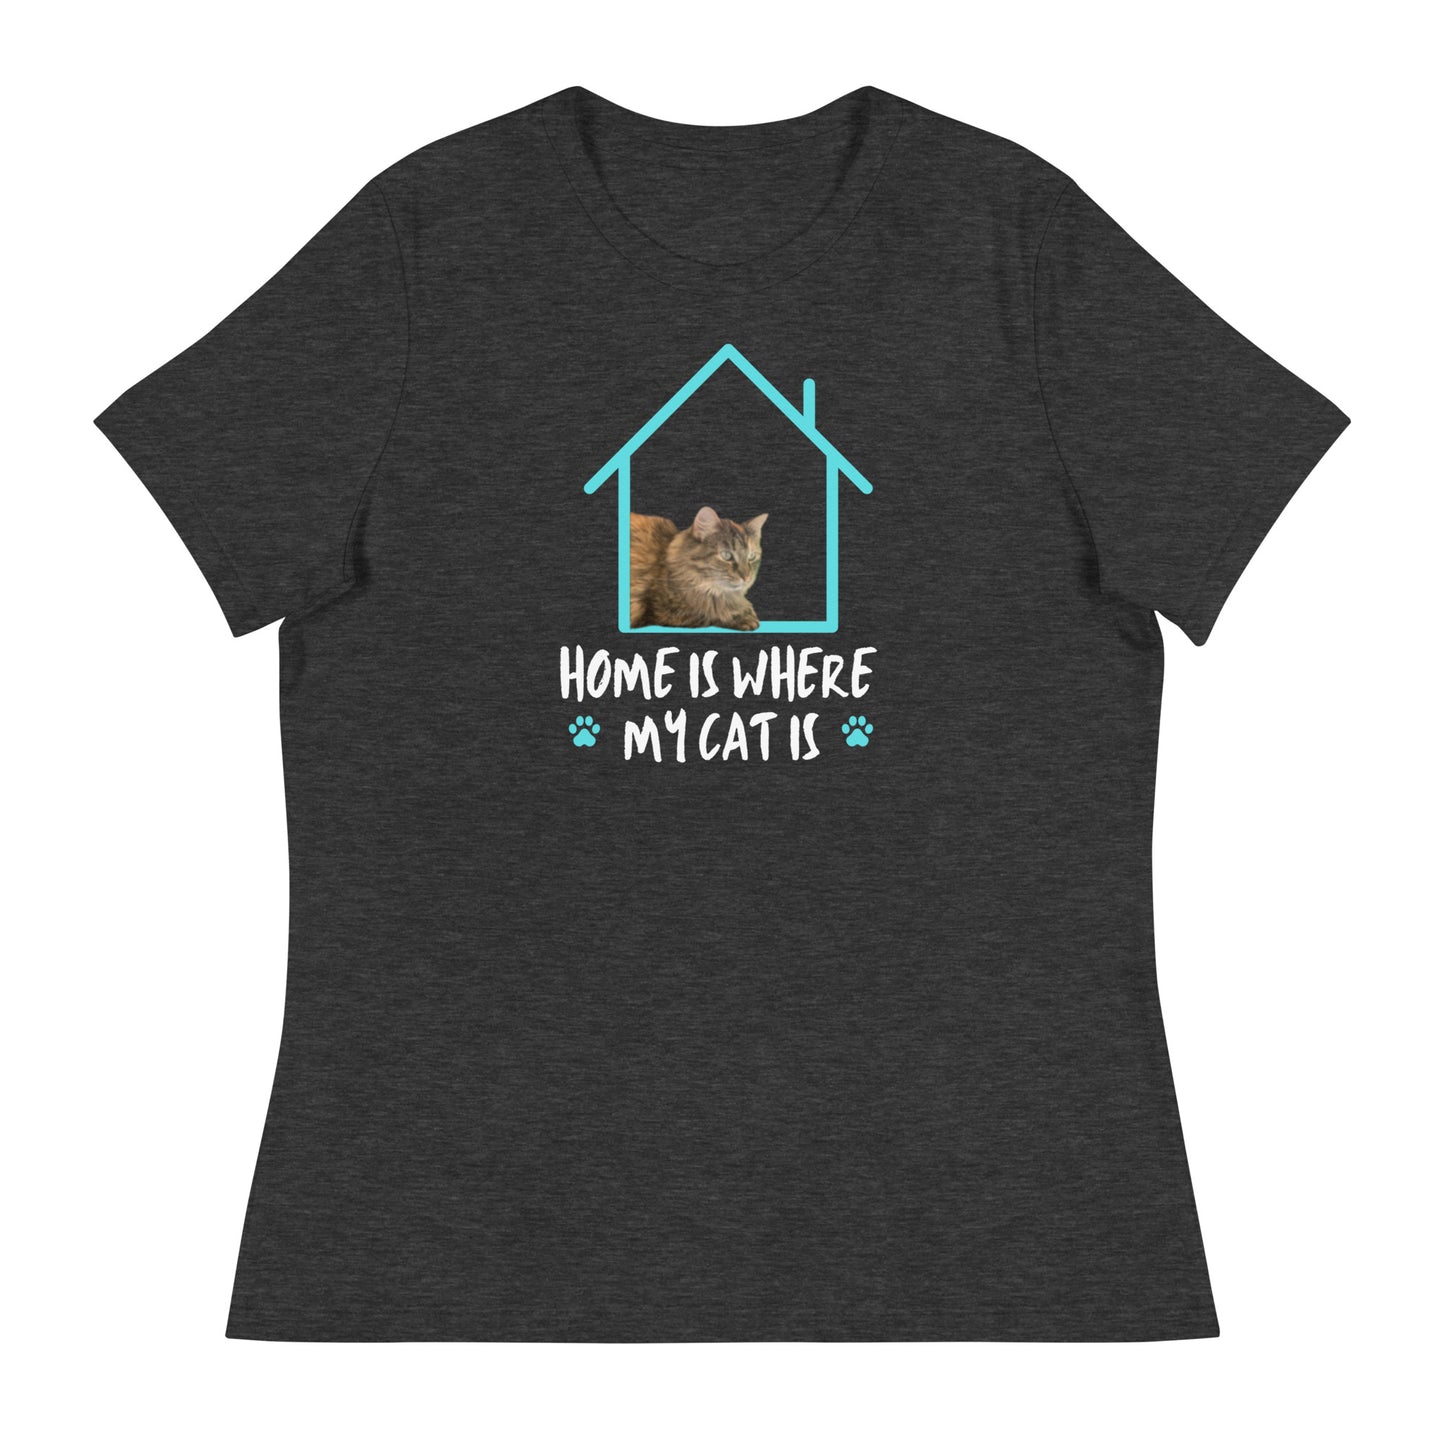 Personalization Cat T-Shirt - Great gift for Cat Lovers! Wrap up warmth and whimsy with our personalized cat shirt, available in both regular and plus sizes. A delightful holiday gift idea for cat lovers, featuring a custom kitten photo that adds a touch of personalized charm to any size.